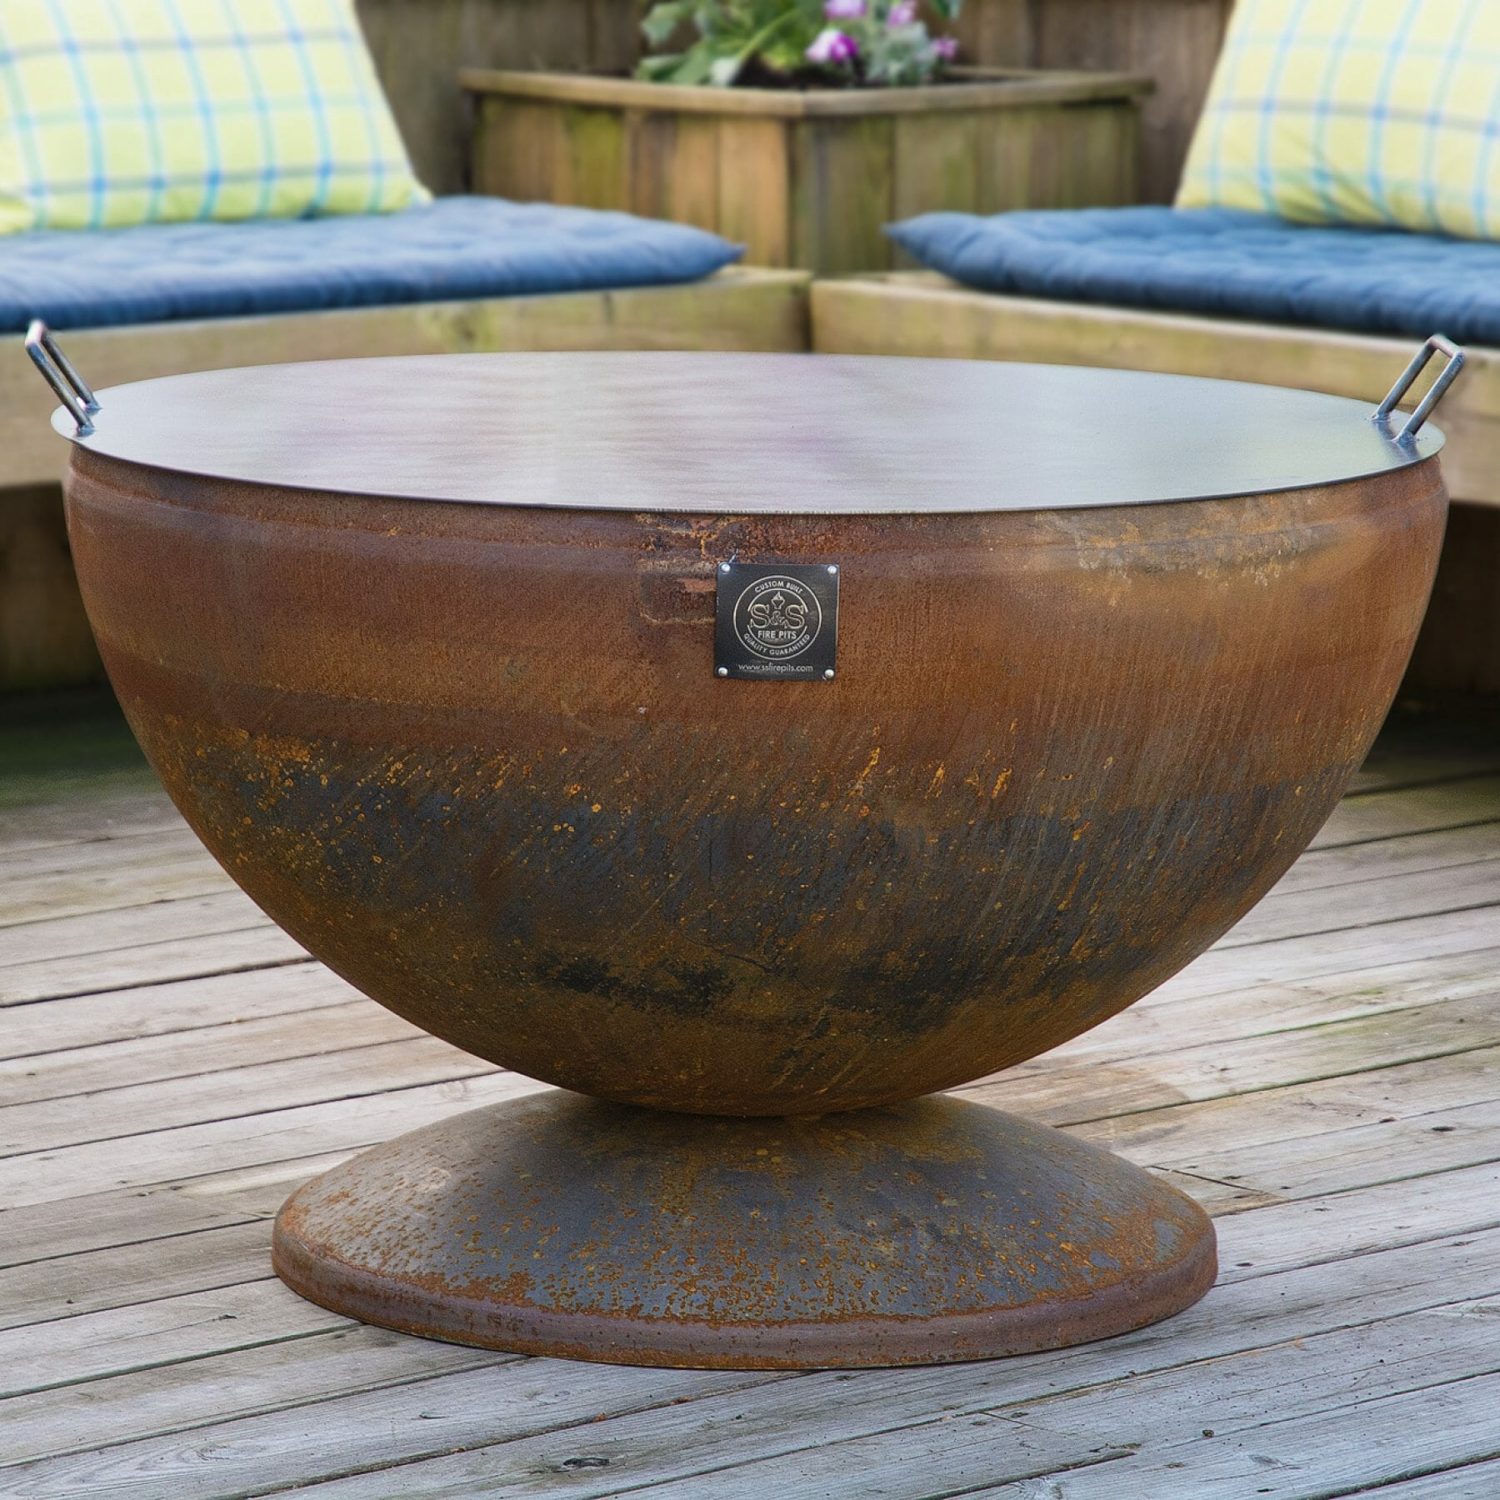 Don Ts Of Using A Fire Pit On Wooden Deck, Small Fire Pits For Decks